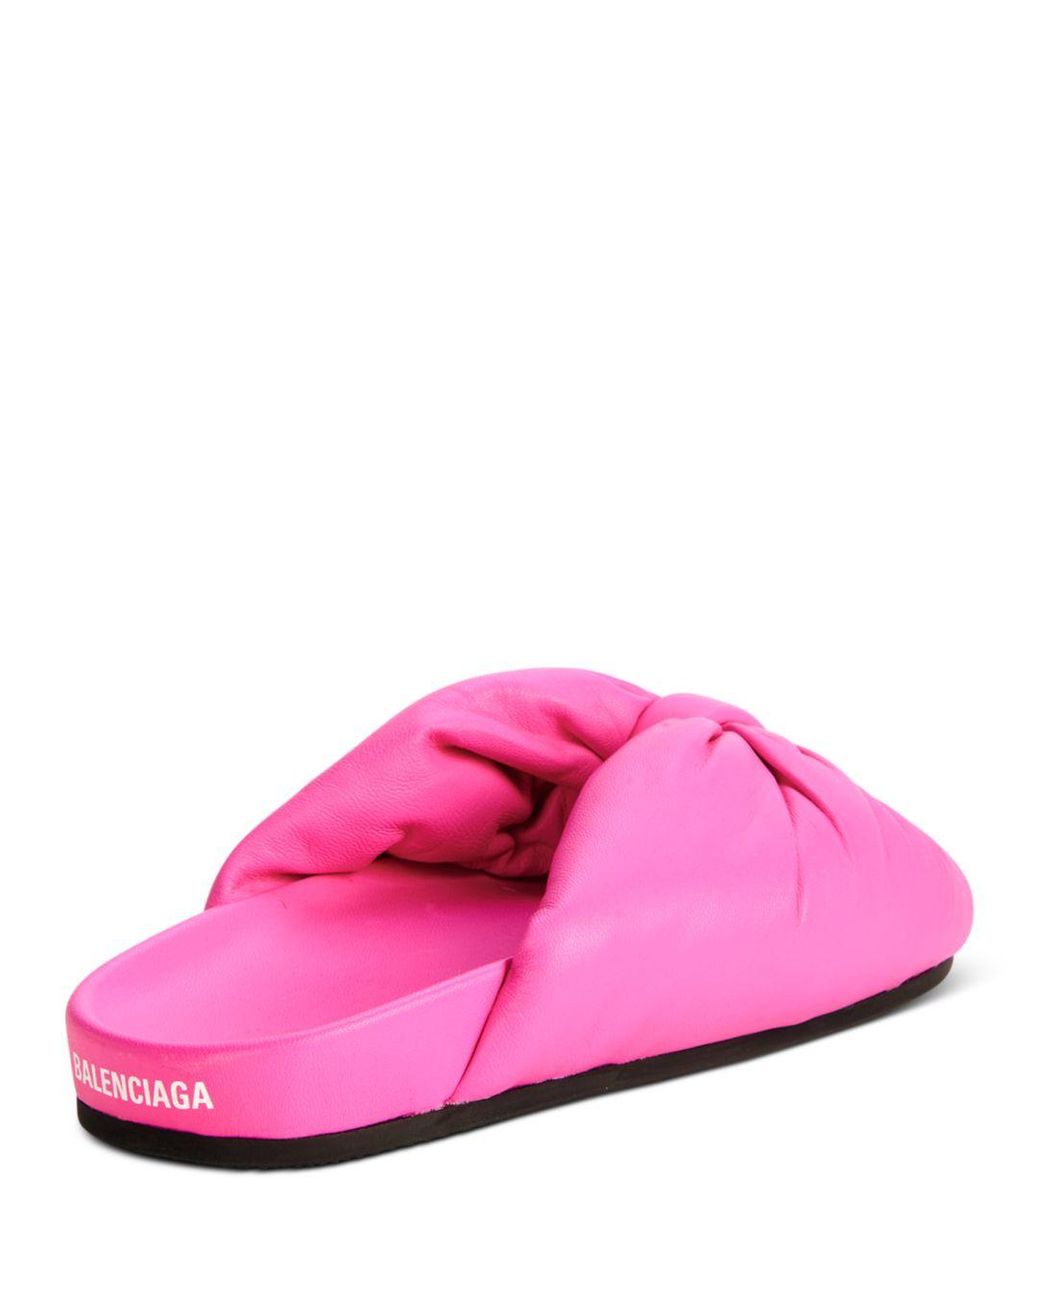 Balenciaga Drapy KnotFront Leather Mules Pink 385 Sandals